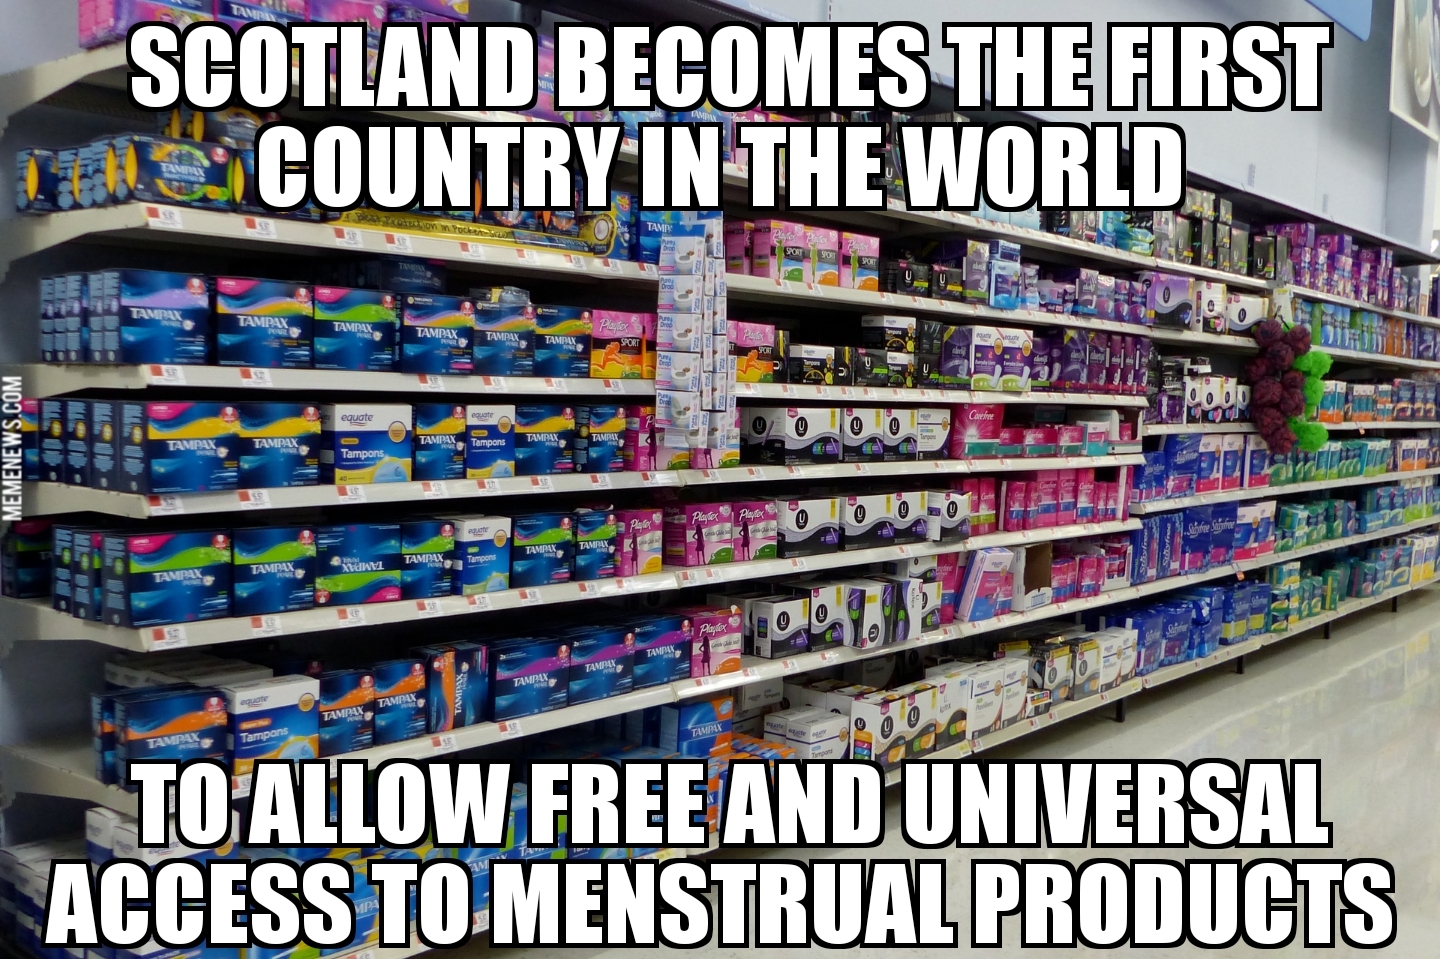 Scotland to allow access to free menstrual products